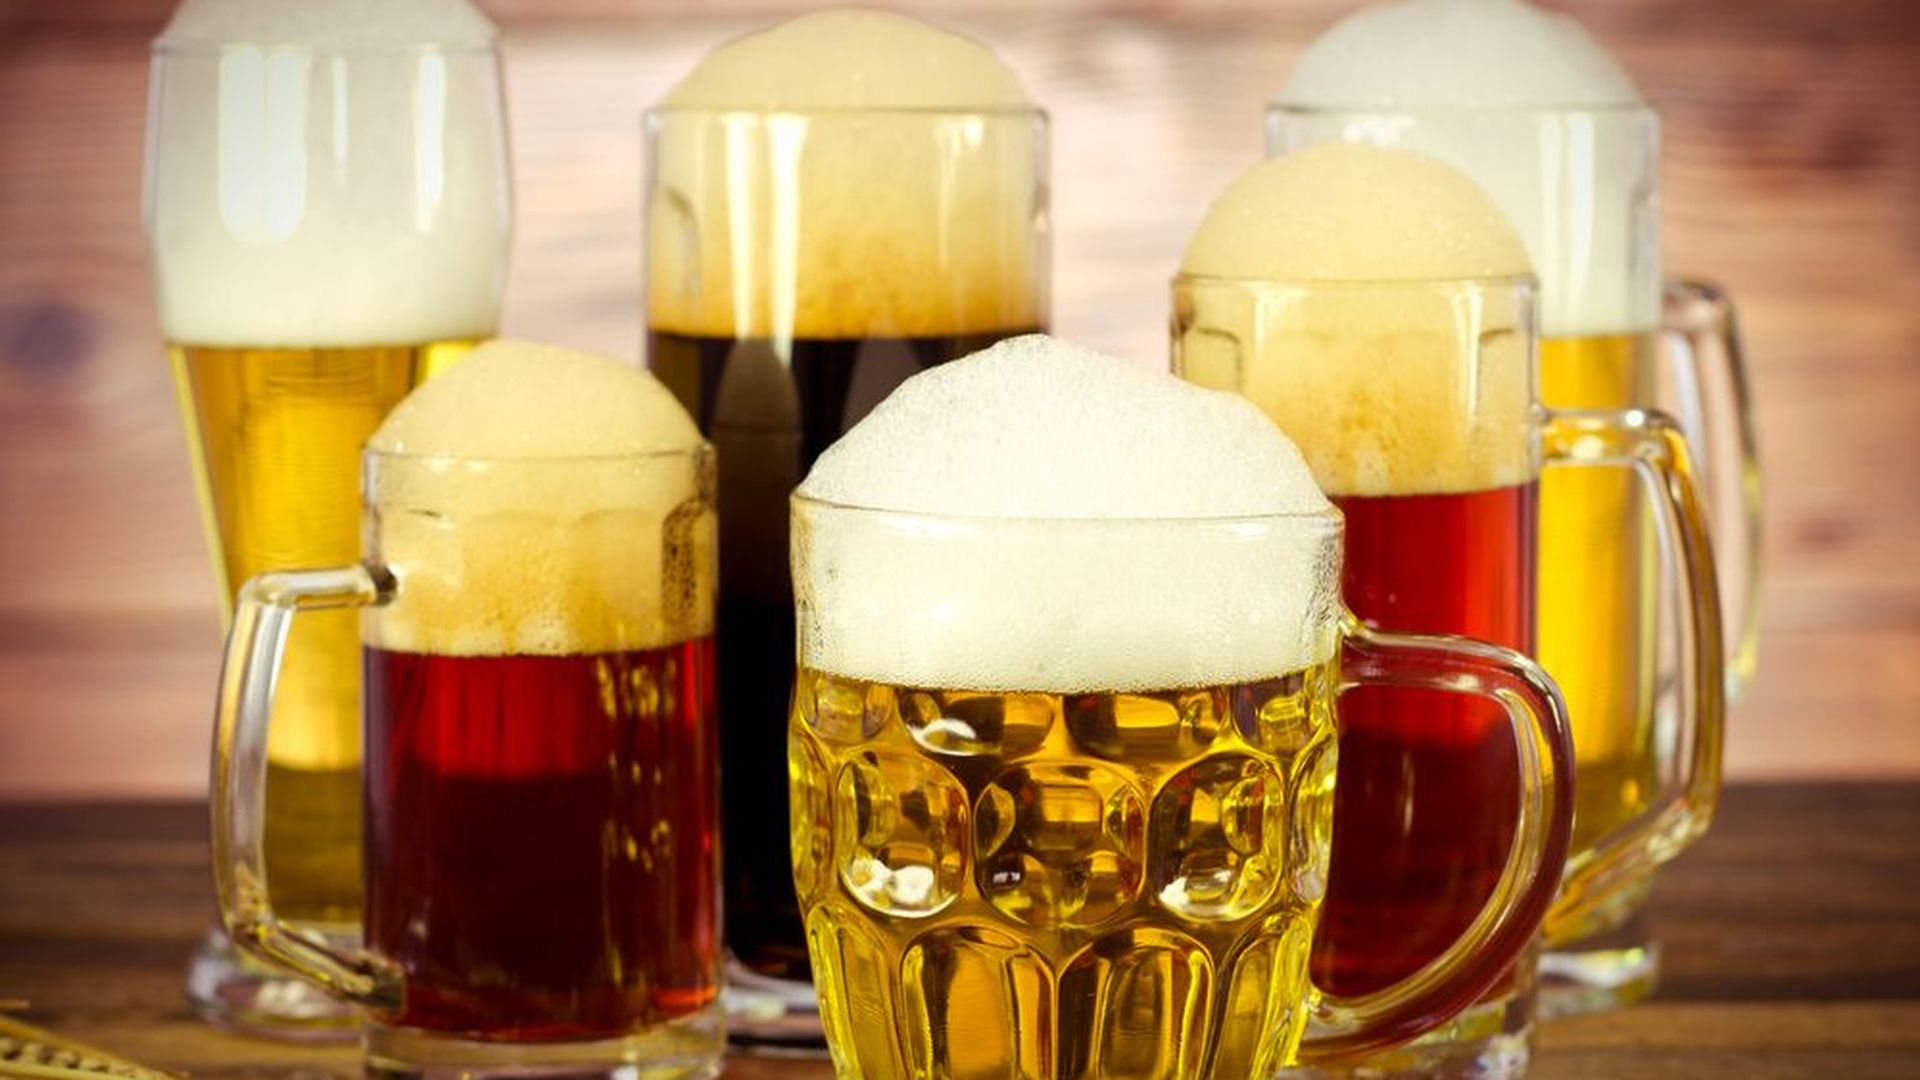 Which beer style is known for its light and effervescent character?